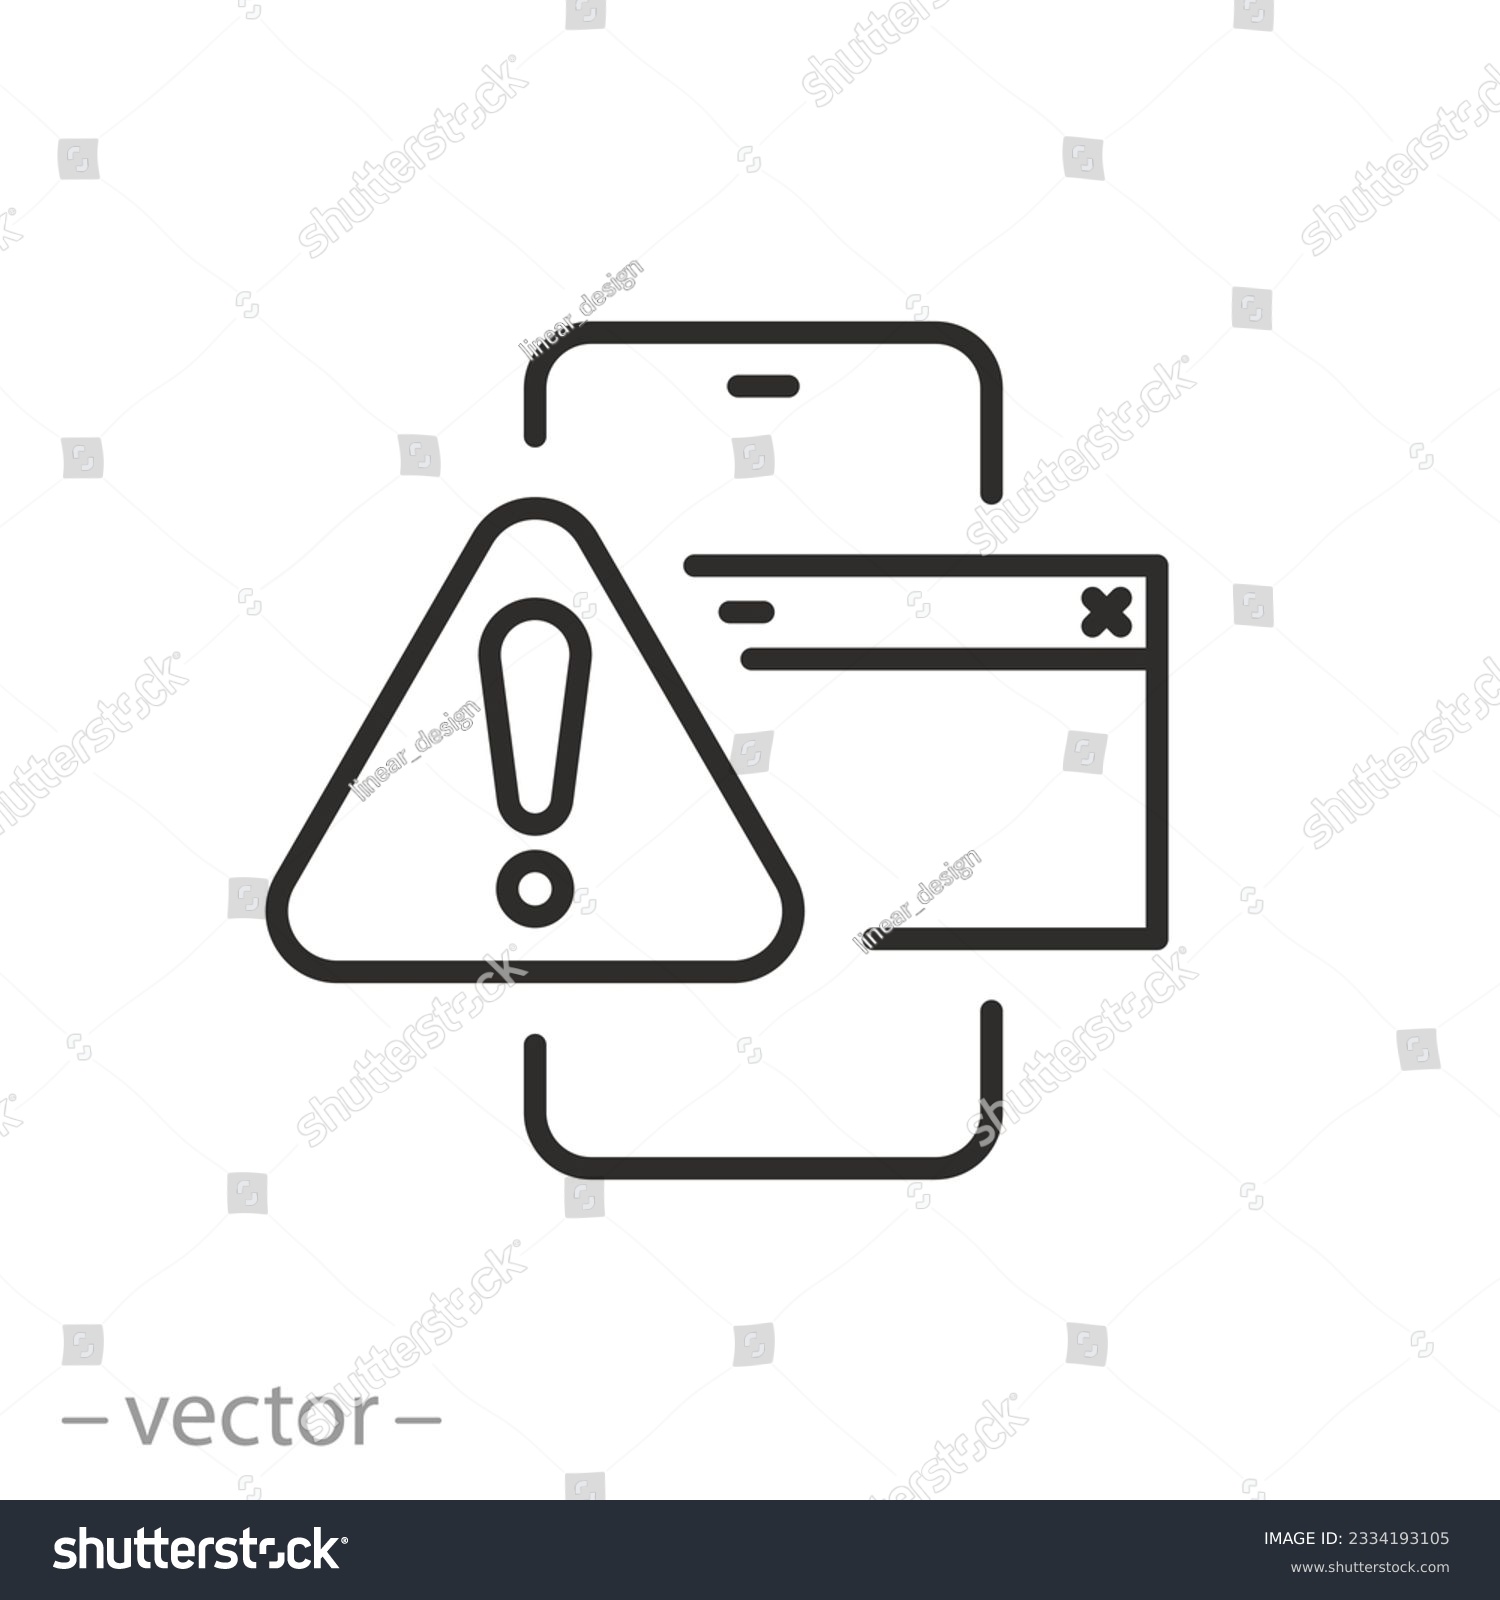 SVG of uncensored content icon, obscene site page warning, inappropriate censored content, thin line symbol - editable stroke vector illustration svg